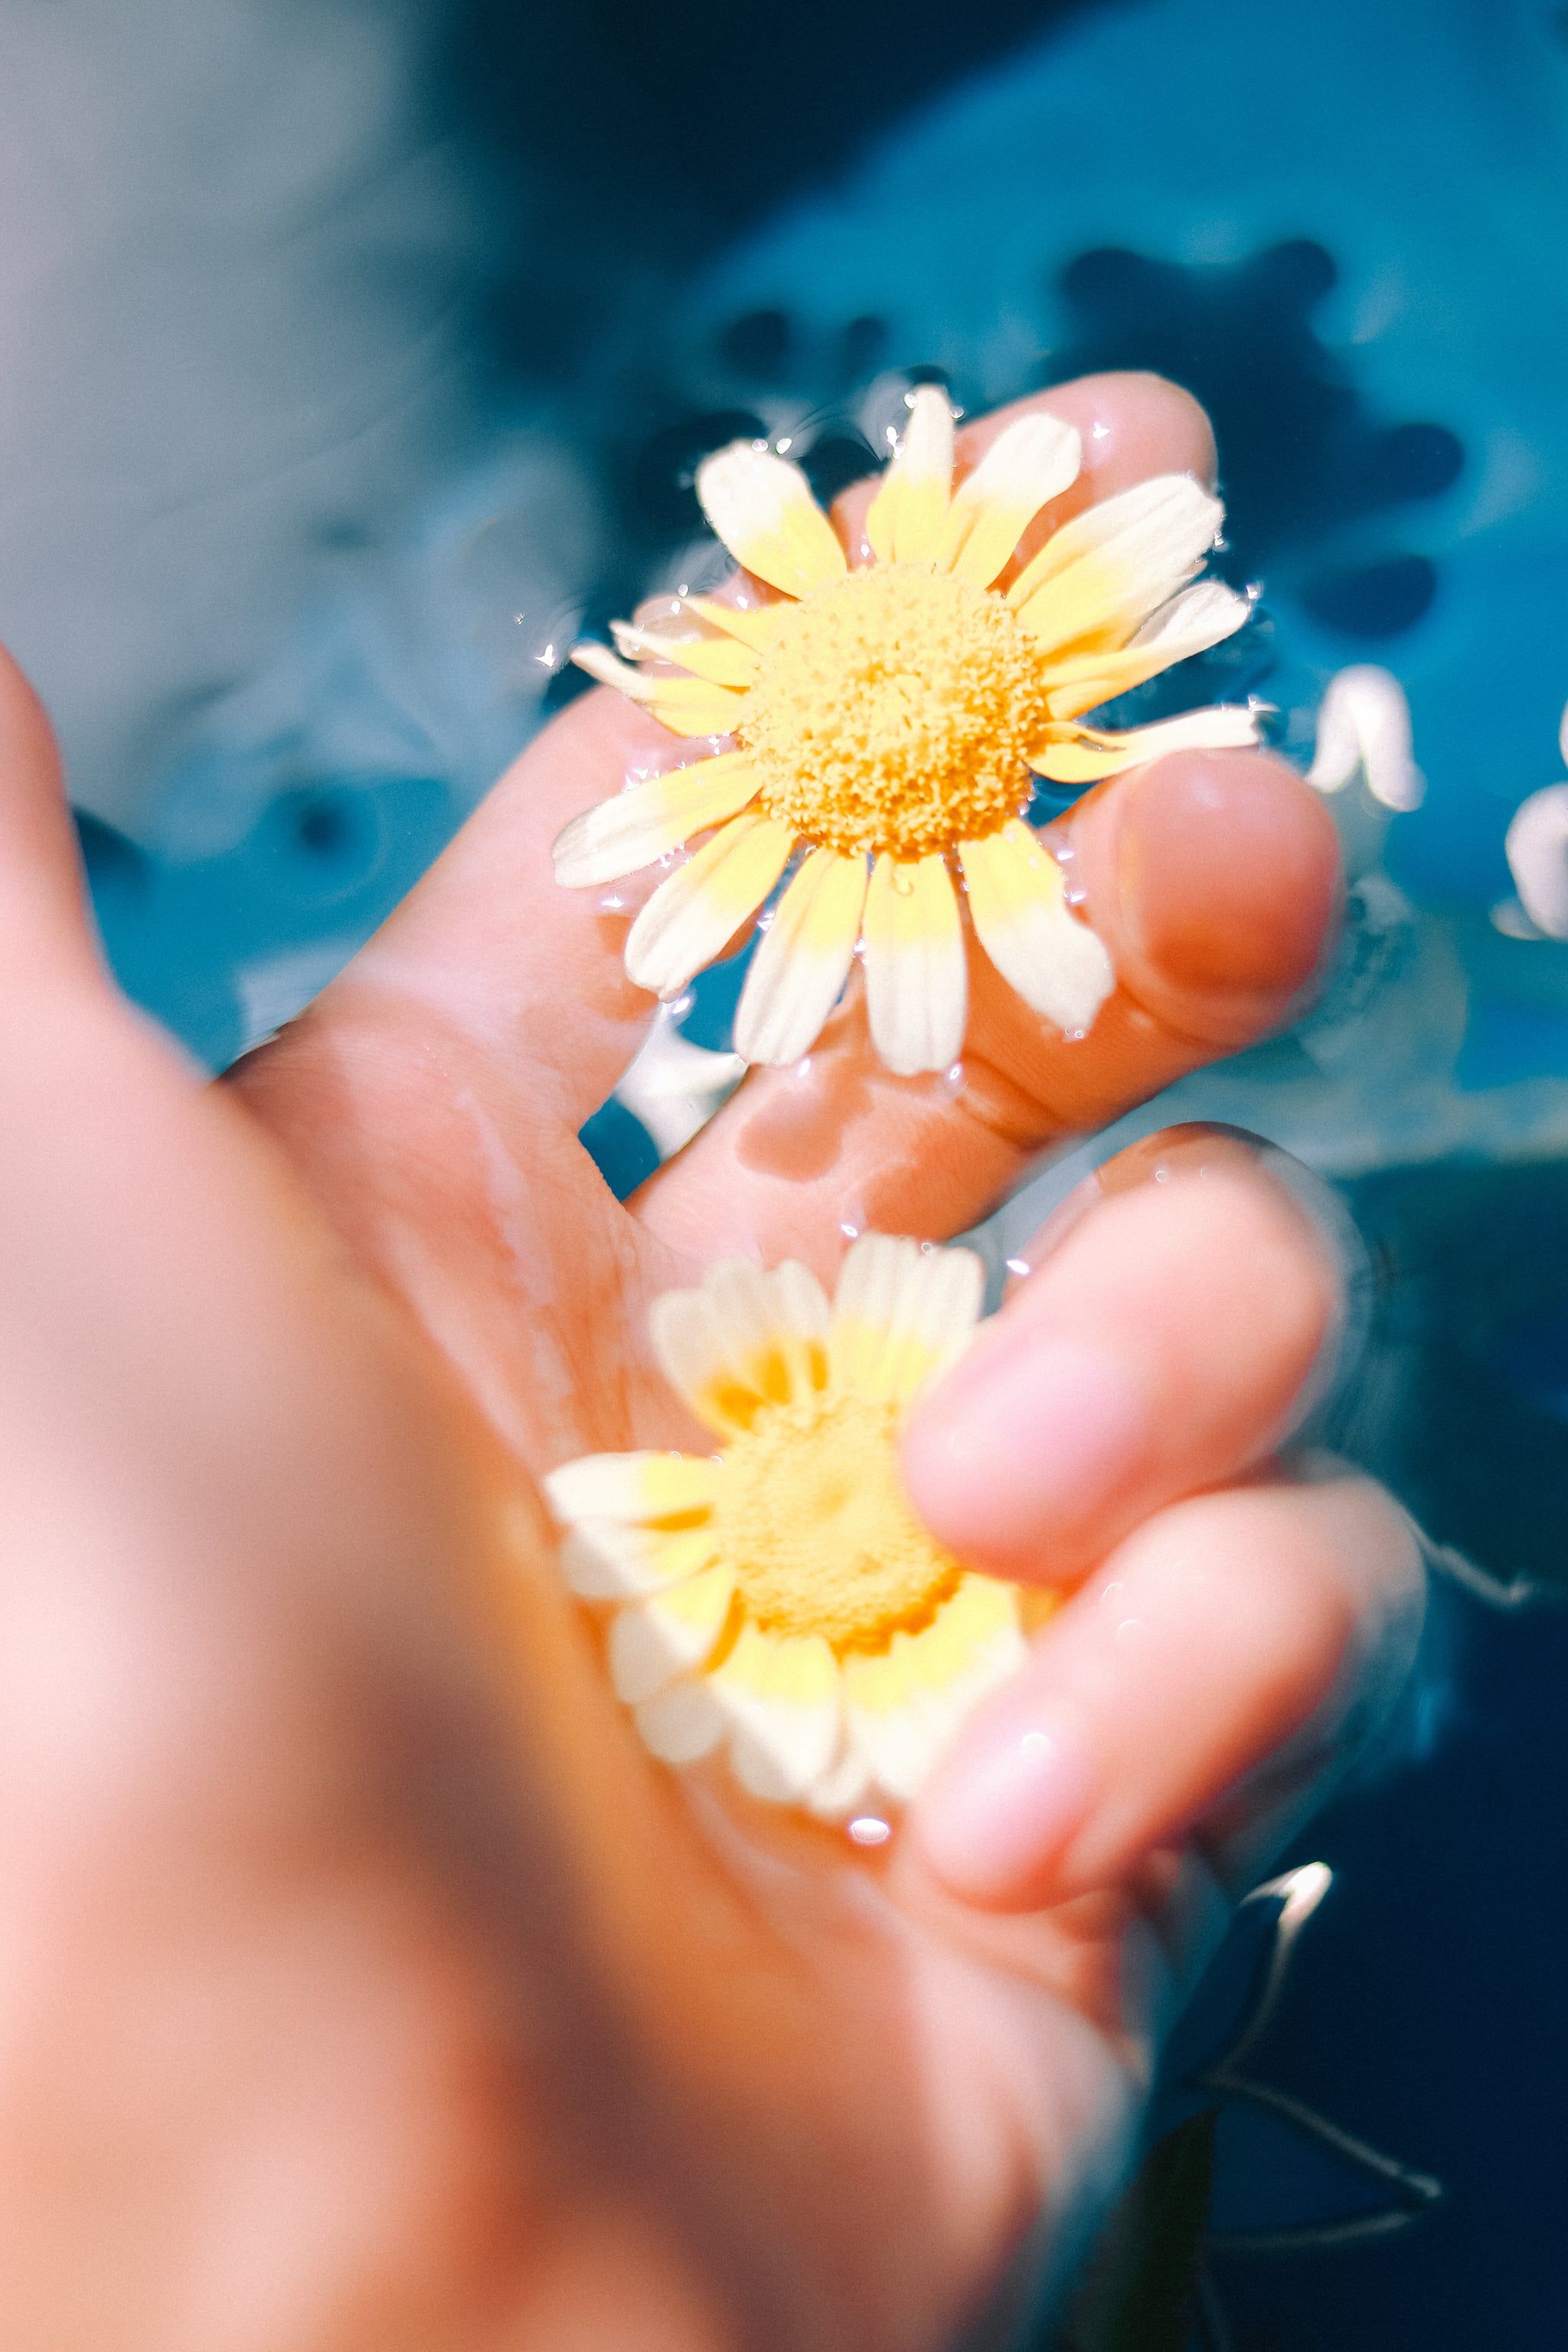 A person holding two flowers in their hand - Flower, photography, iPhone, daisy, spring, cute iPhone, couple, profile picture